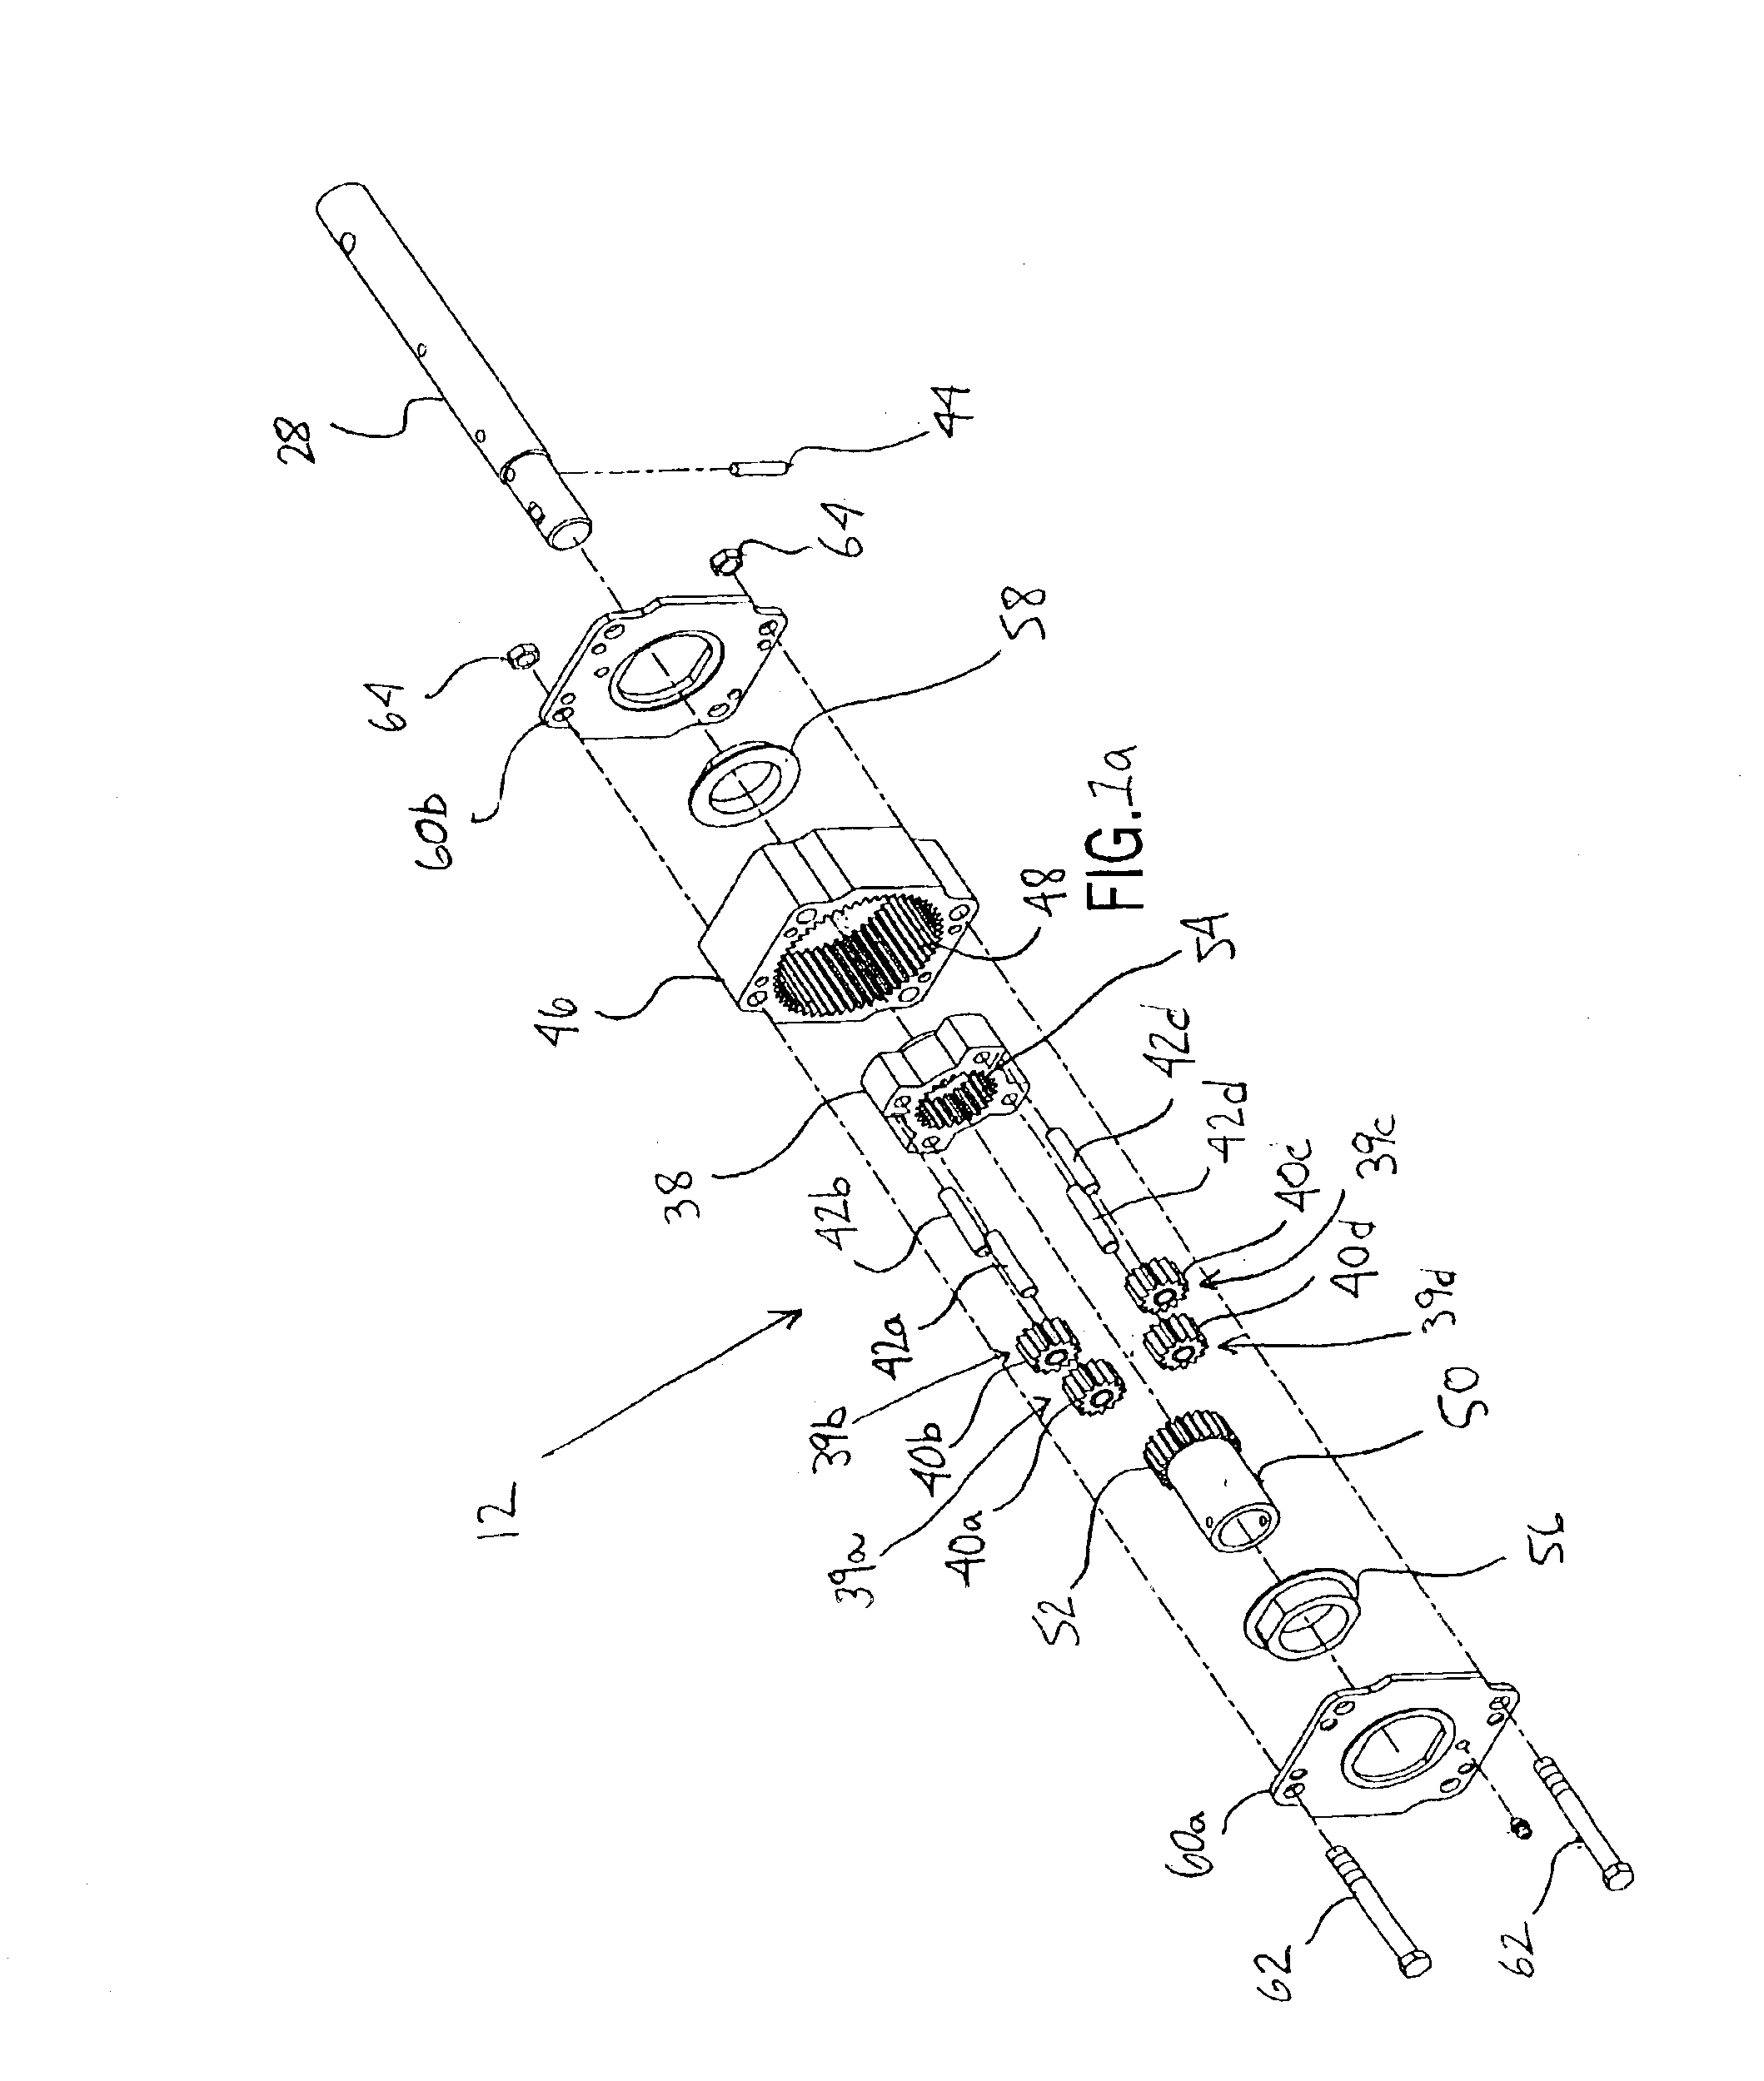 Multi-speed drop leg mechanical jack for use with a trailer